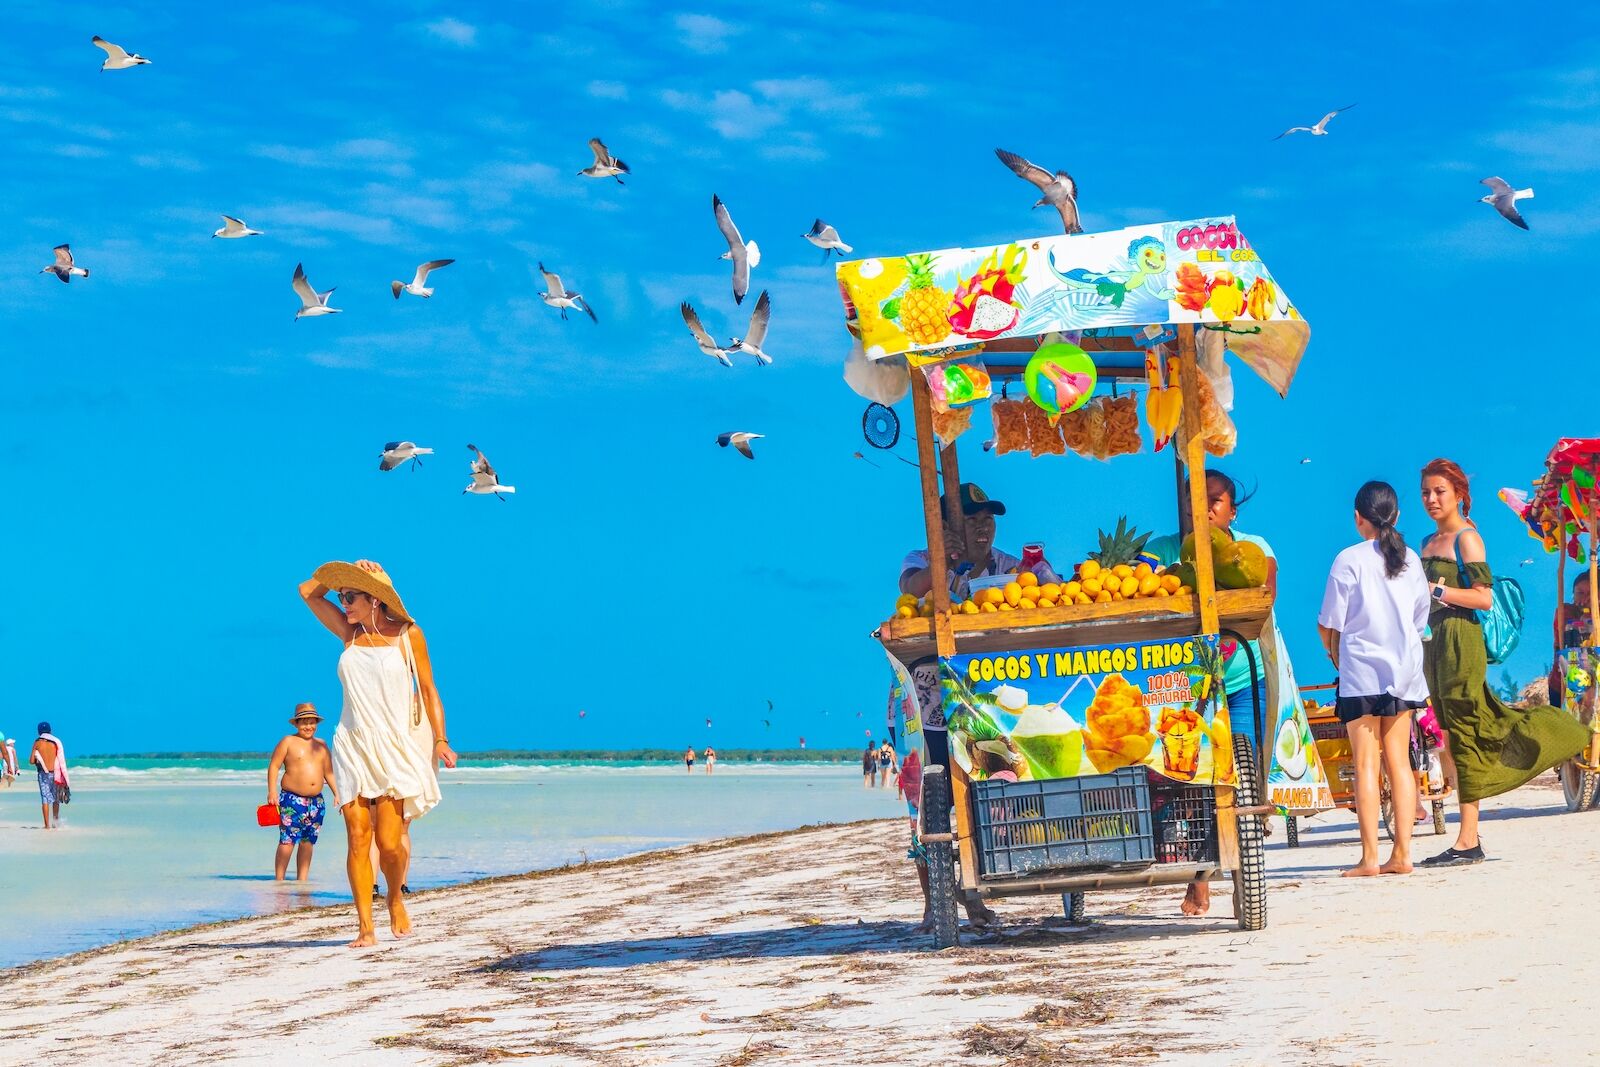 Holbox Mexico 21. December 2021 Fruit and mango seller on beautiful Holbox island sandbank and beach with waves turquoise water and flying seagulls birds in Quintana Roo Mexico.